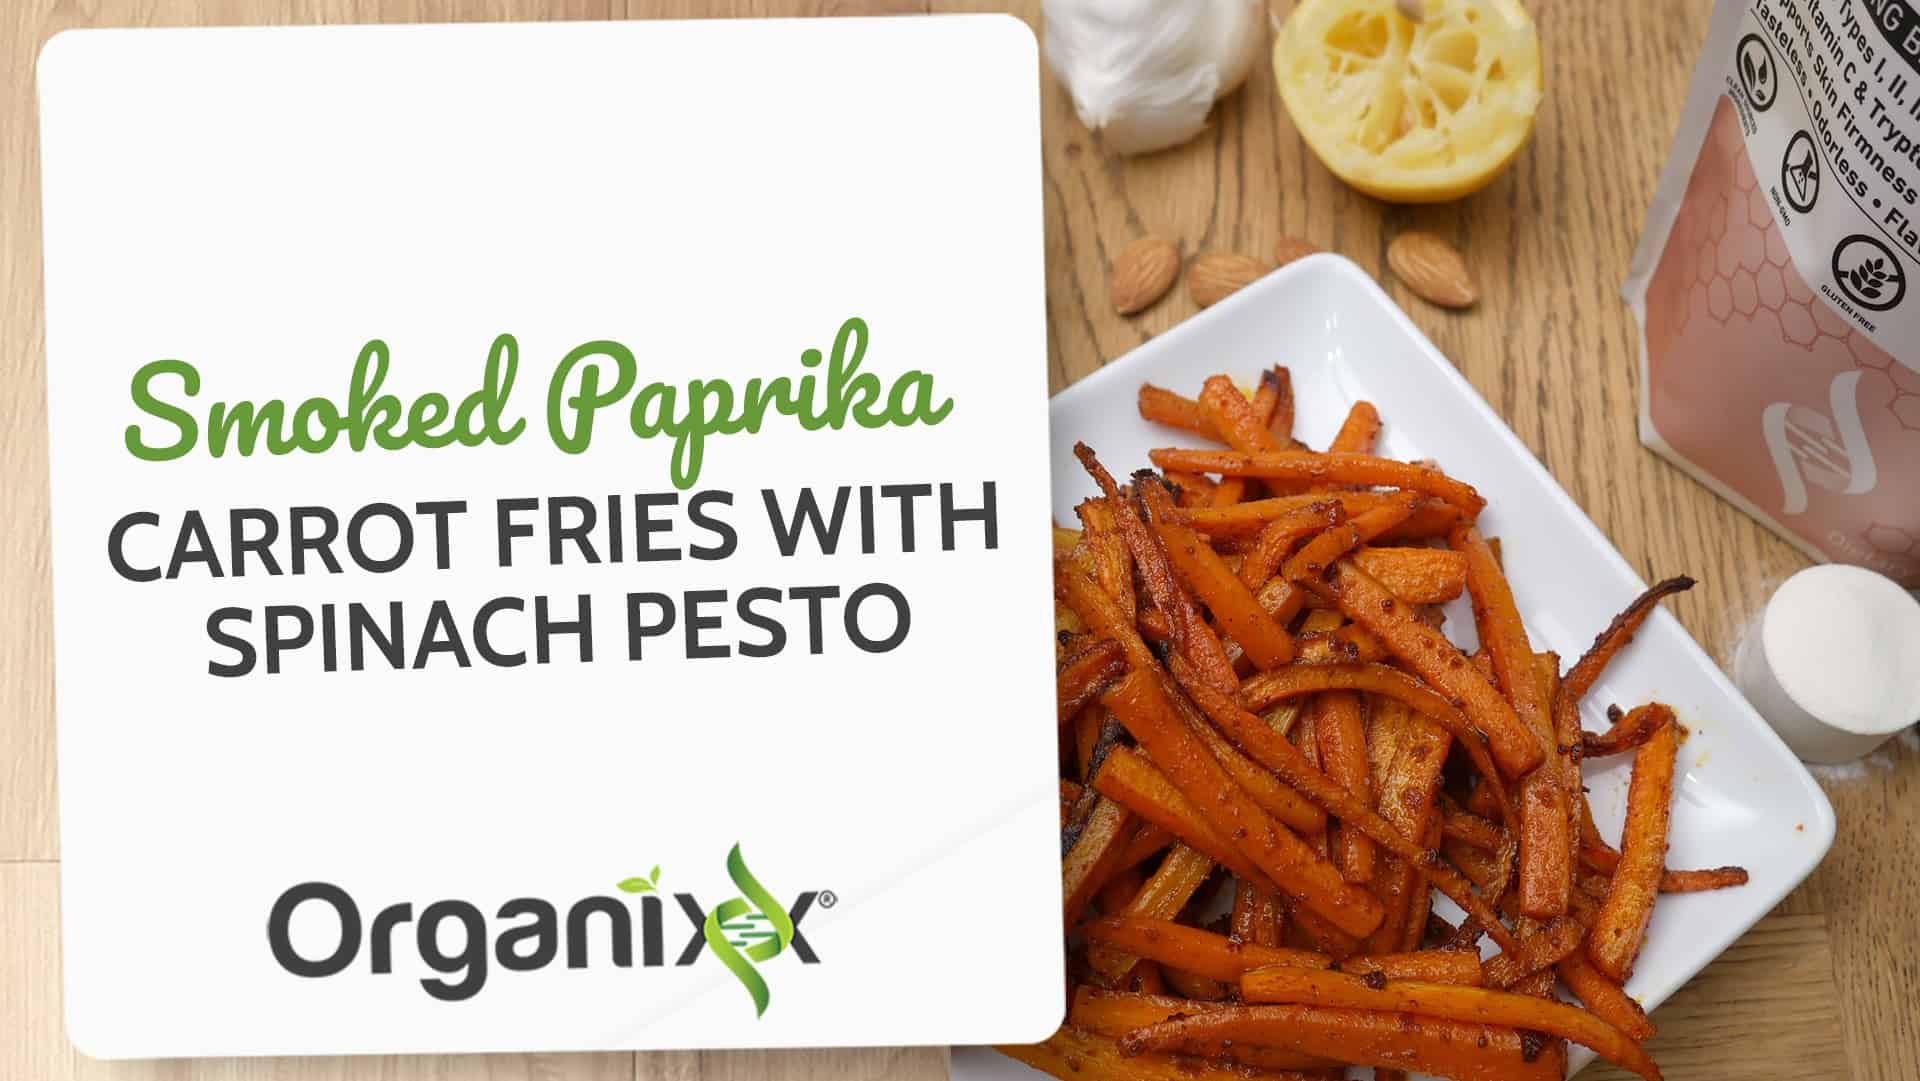 Smoked Paprika Carrot Fries with Spinach Pesto